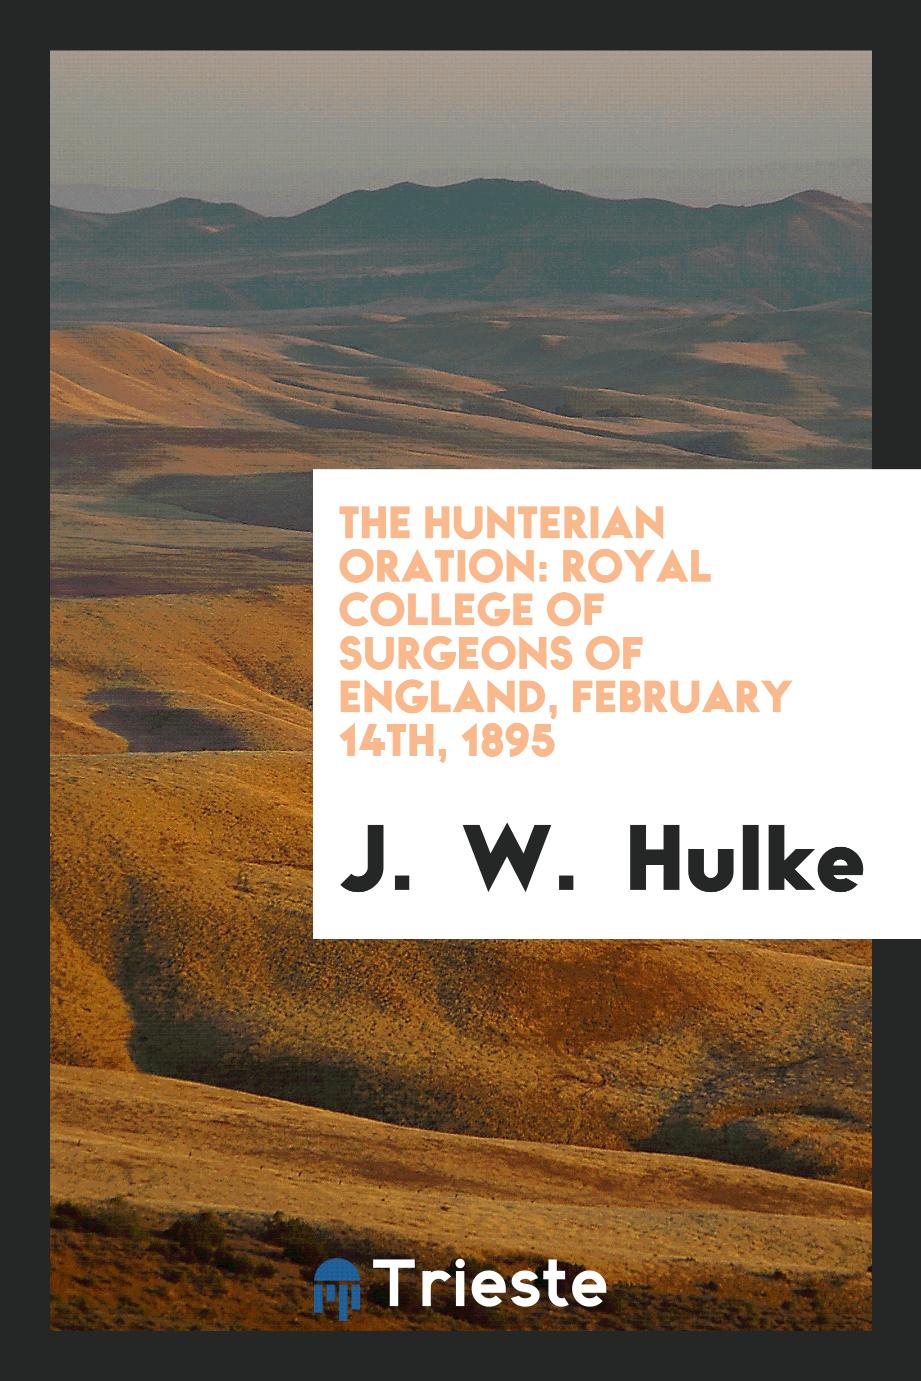 The Hunterian Oration: Royal College of Surgeons of England, February 14th, 1895